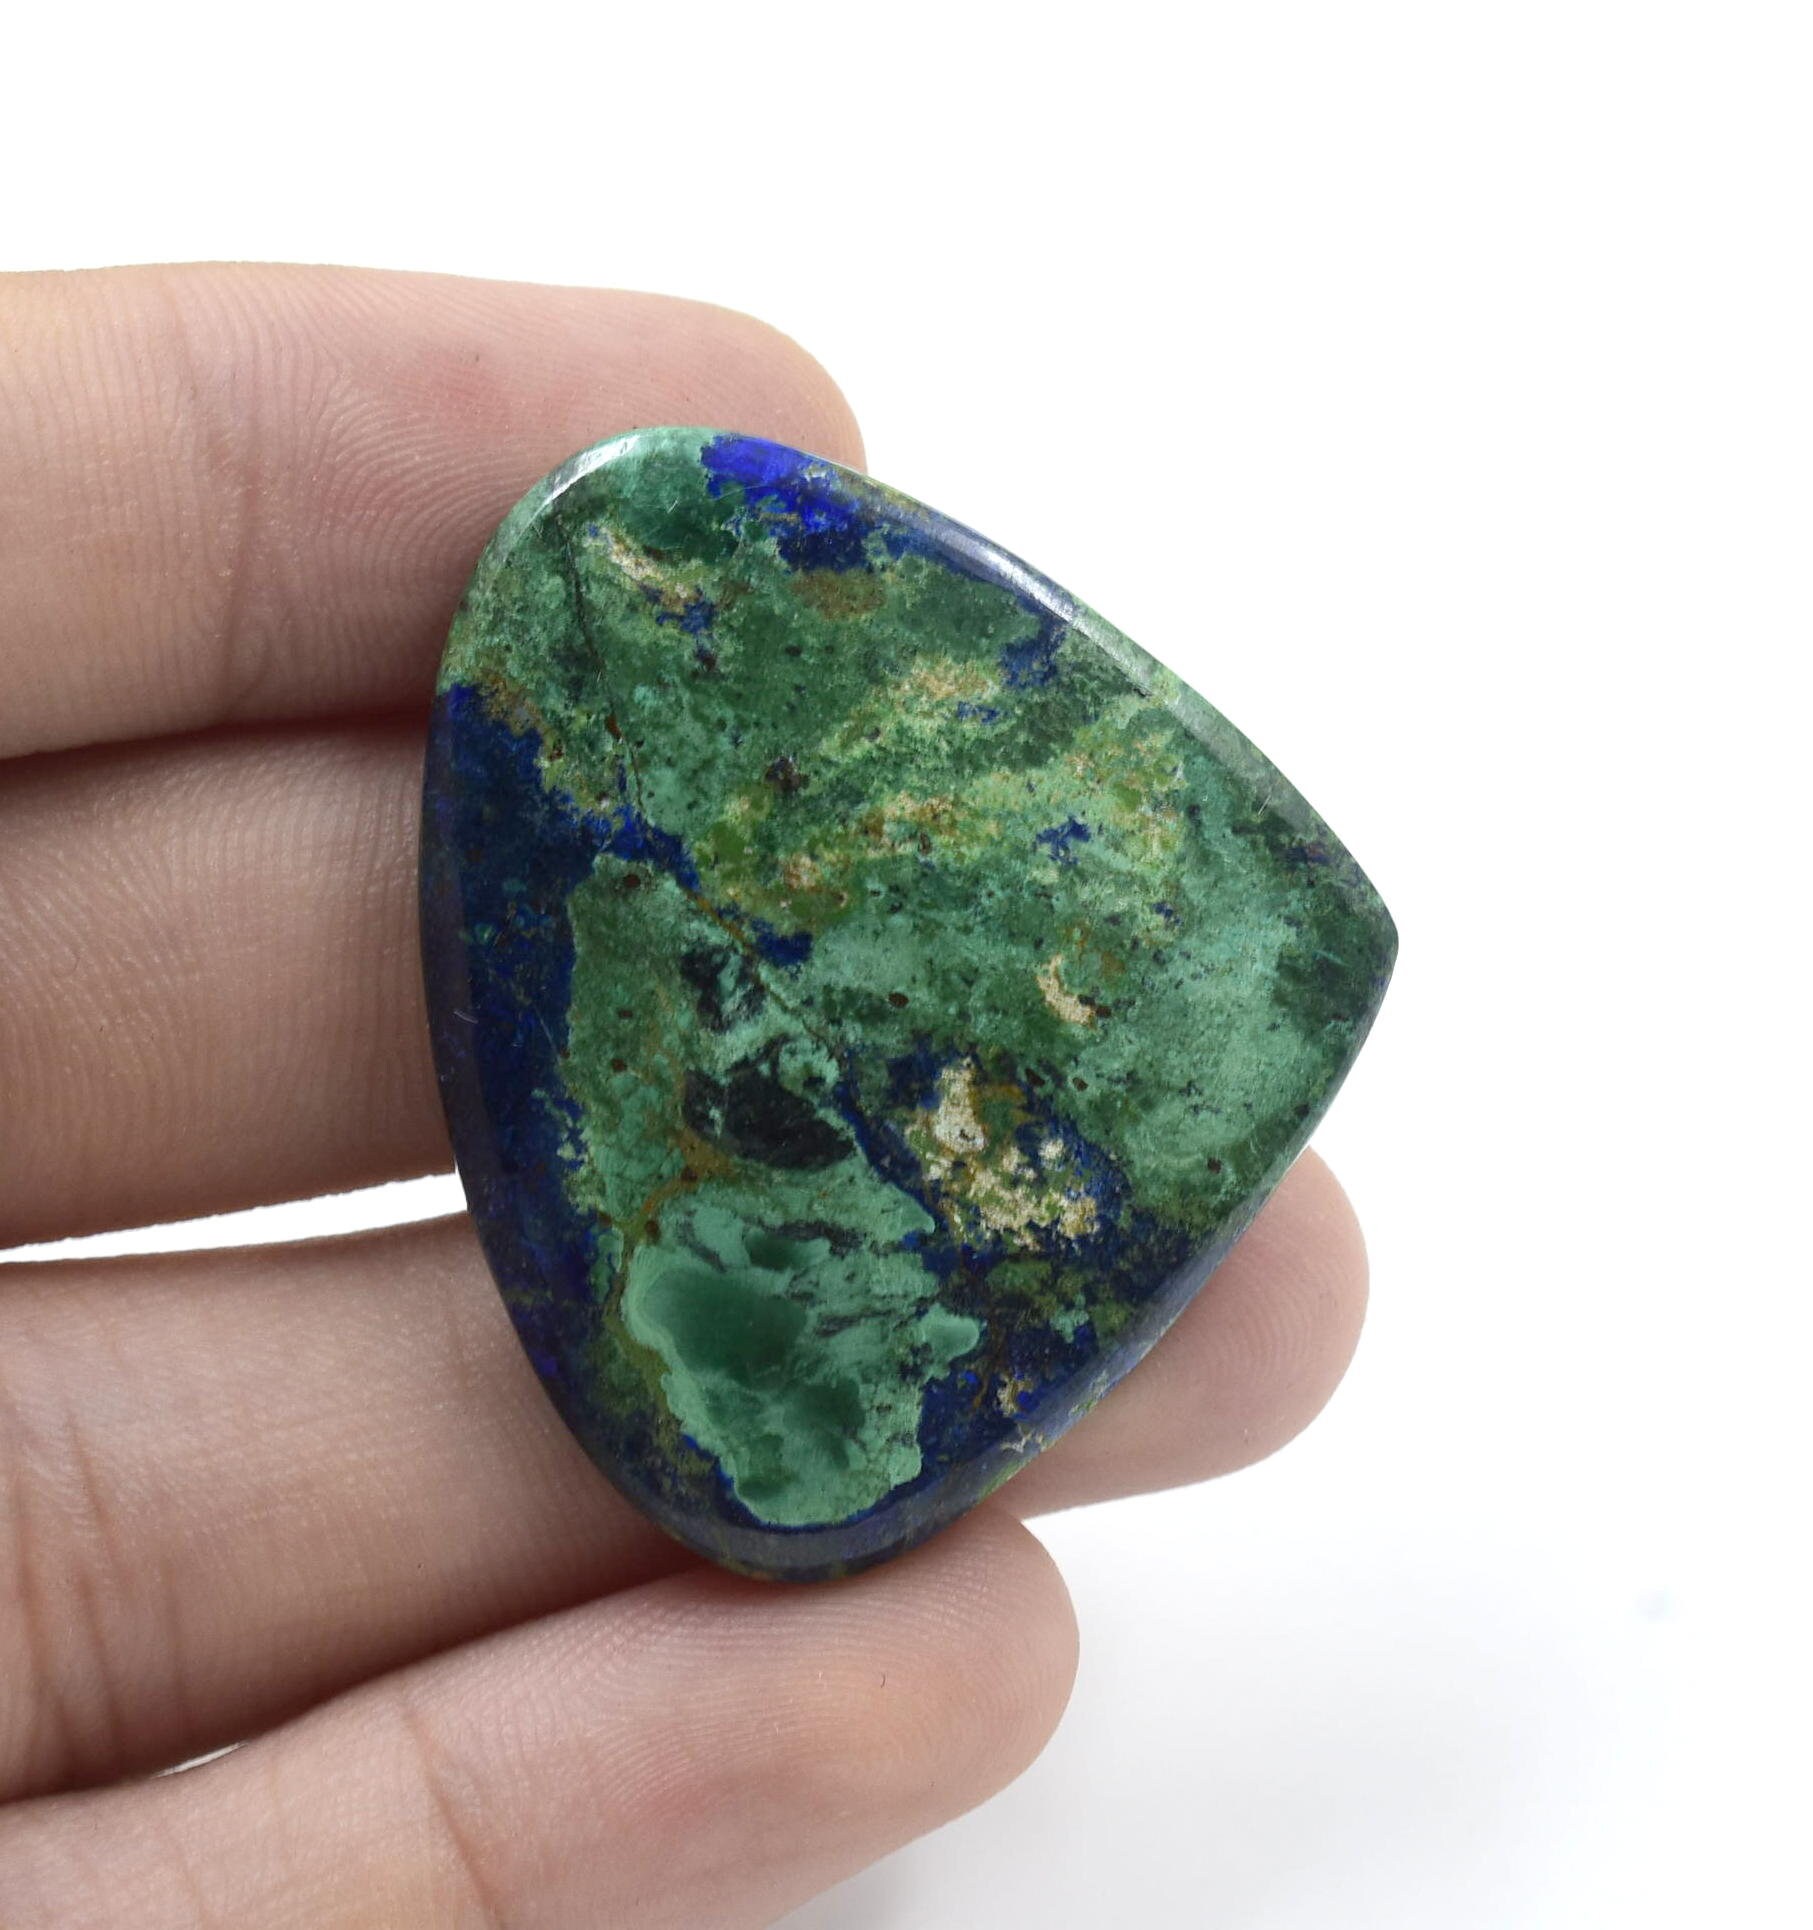 100% Natural Azurite Malachite Cabochon Good quality stone Beautiful Art Making for jewellery Ring 78.75 CARAT 33X40X6 MM | Save 33% - Rajasthan Living 12